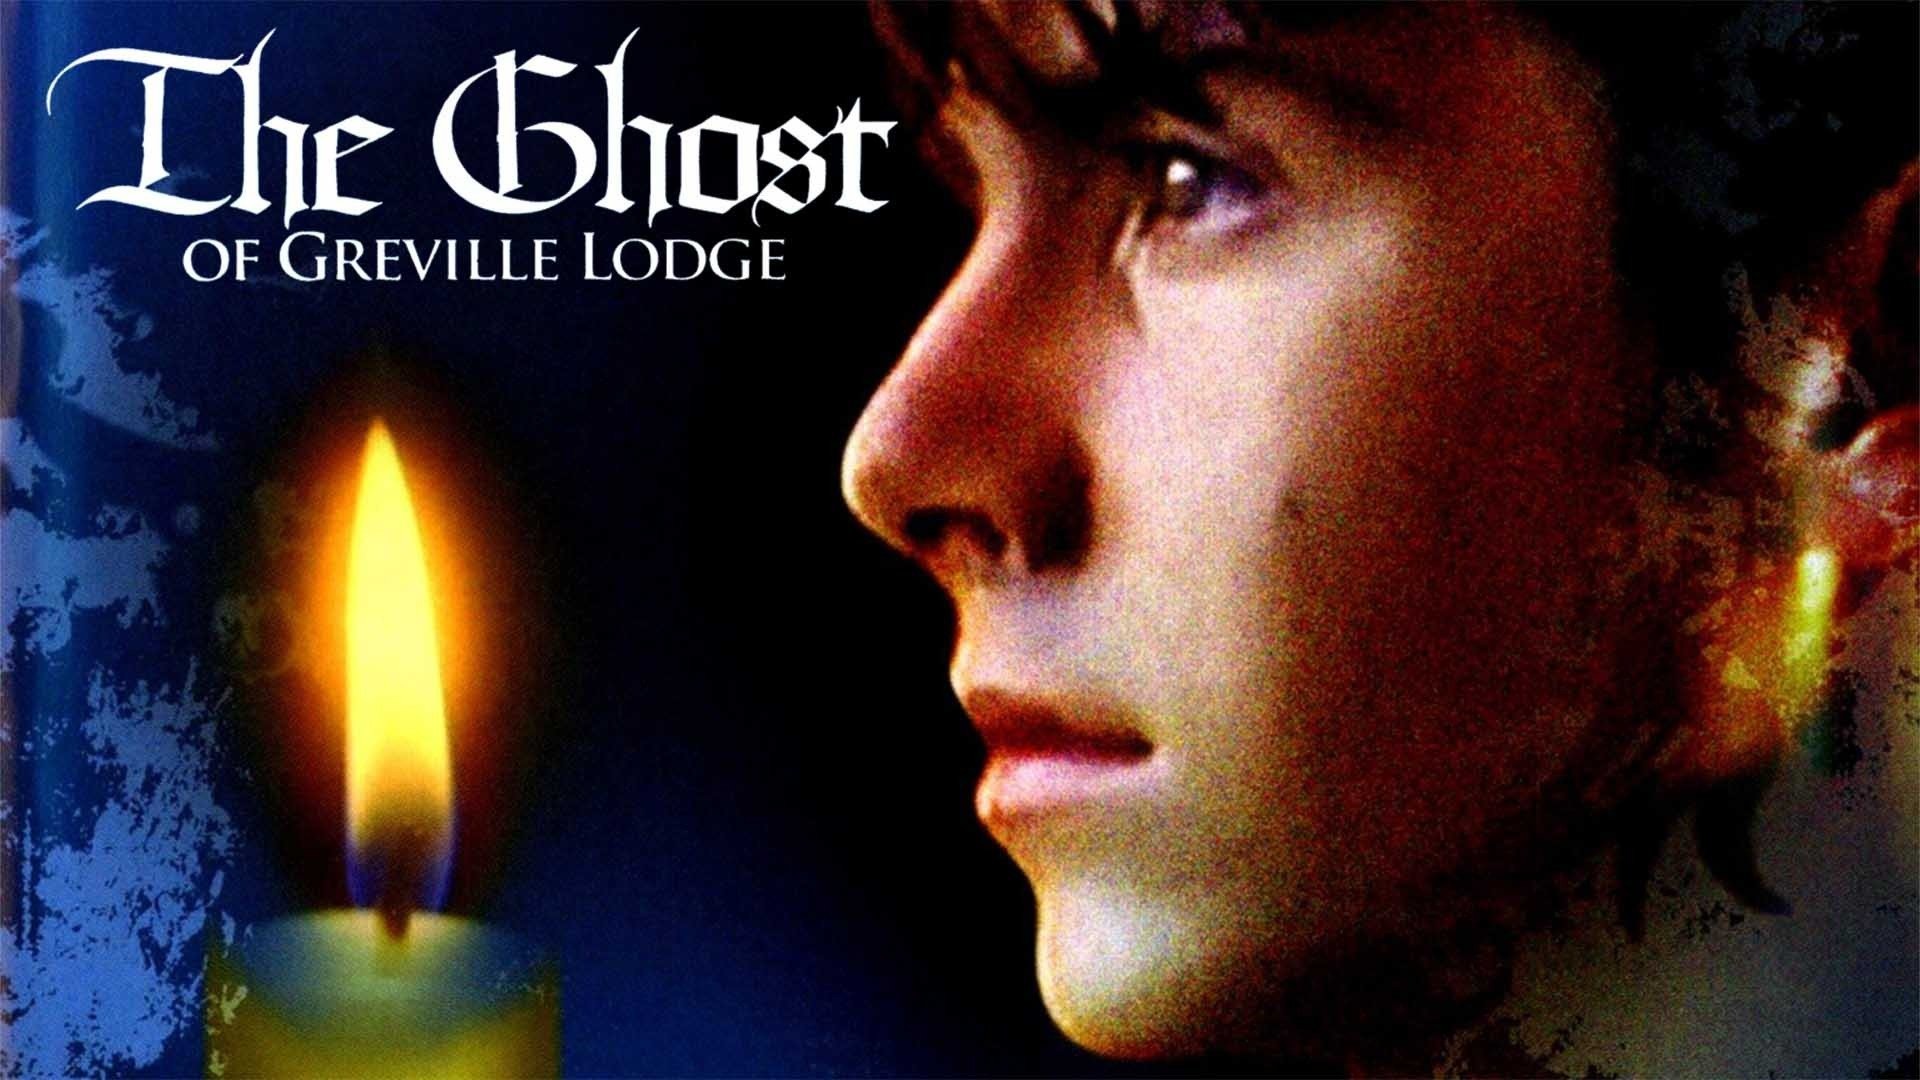 The Ghost of Greville Lodge on DVD – Renown Films